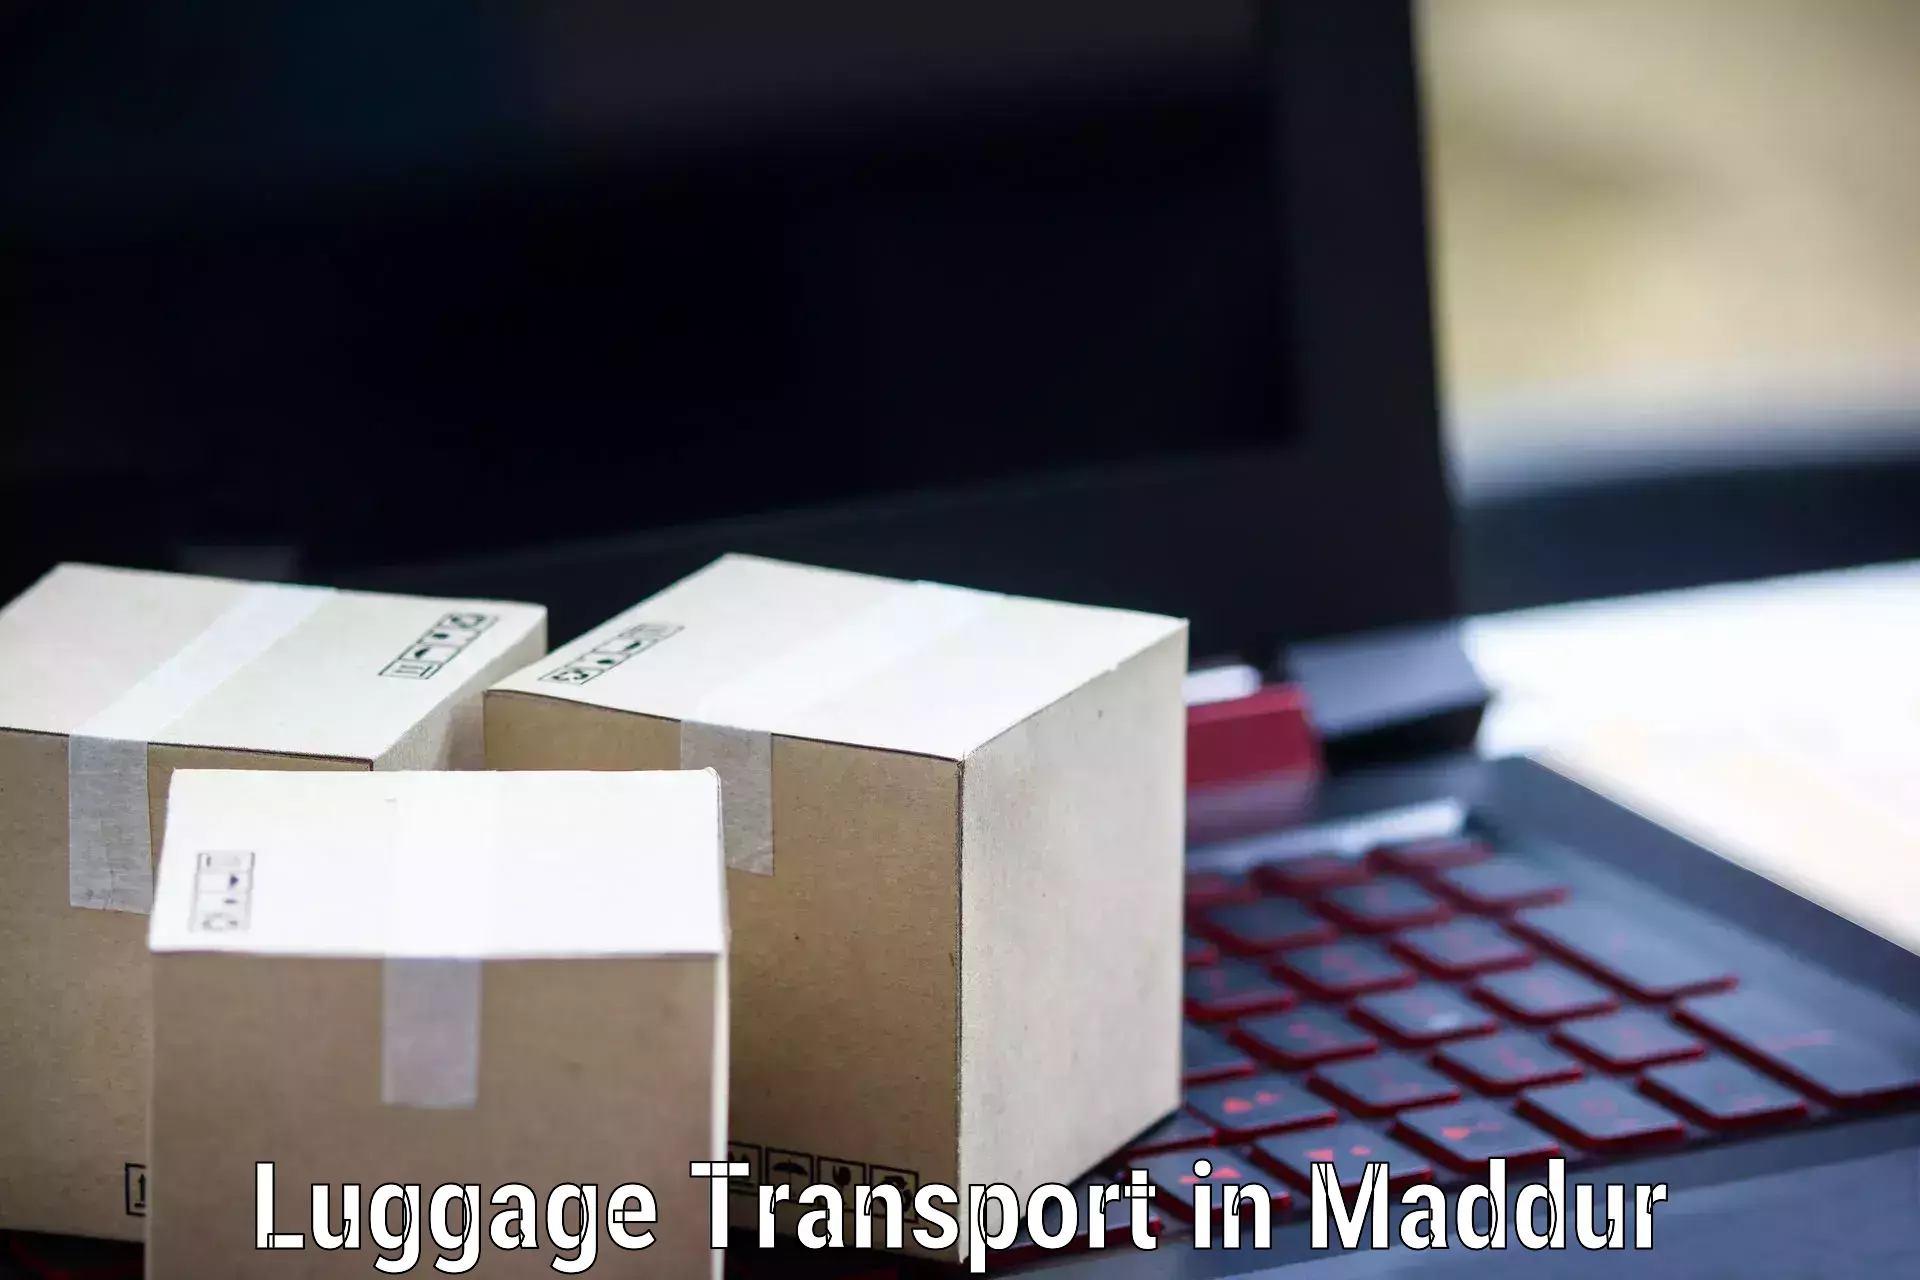 Corporate baggage transport in Maddur